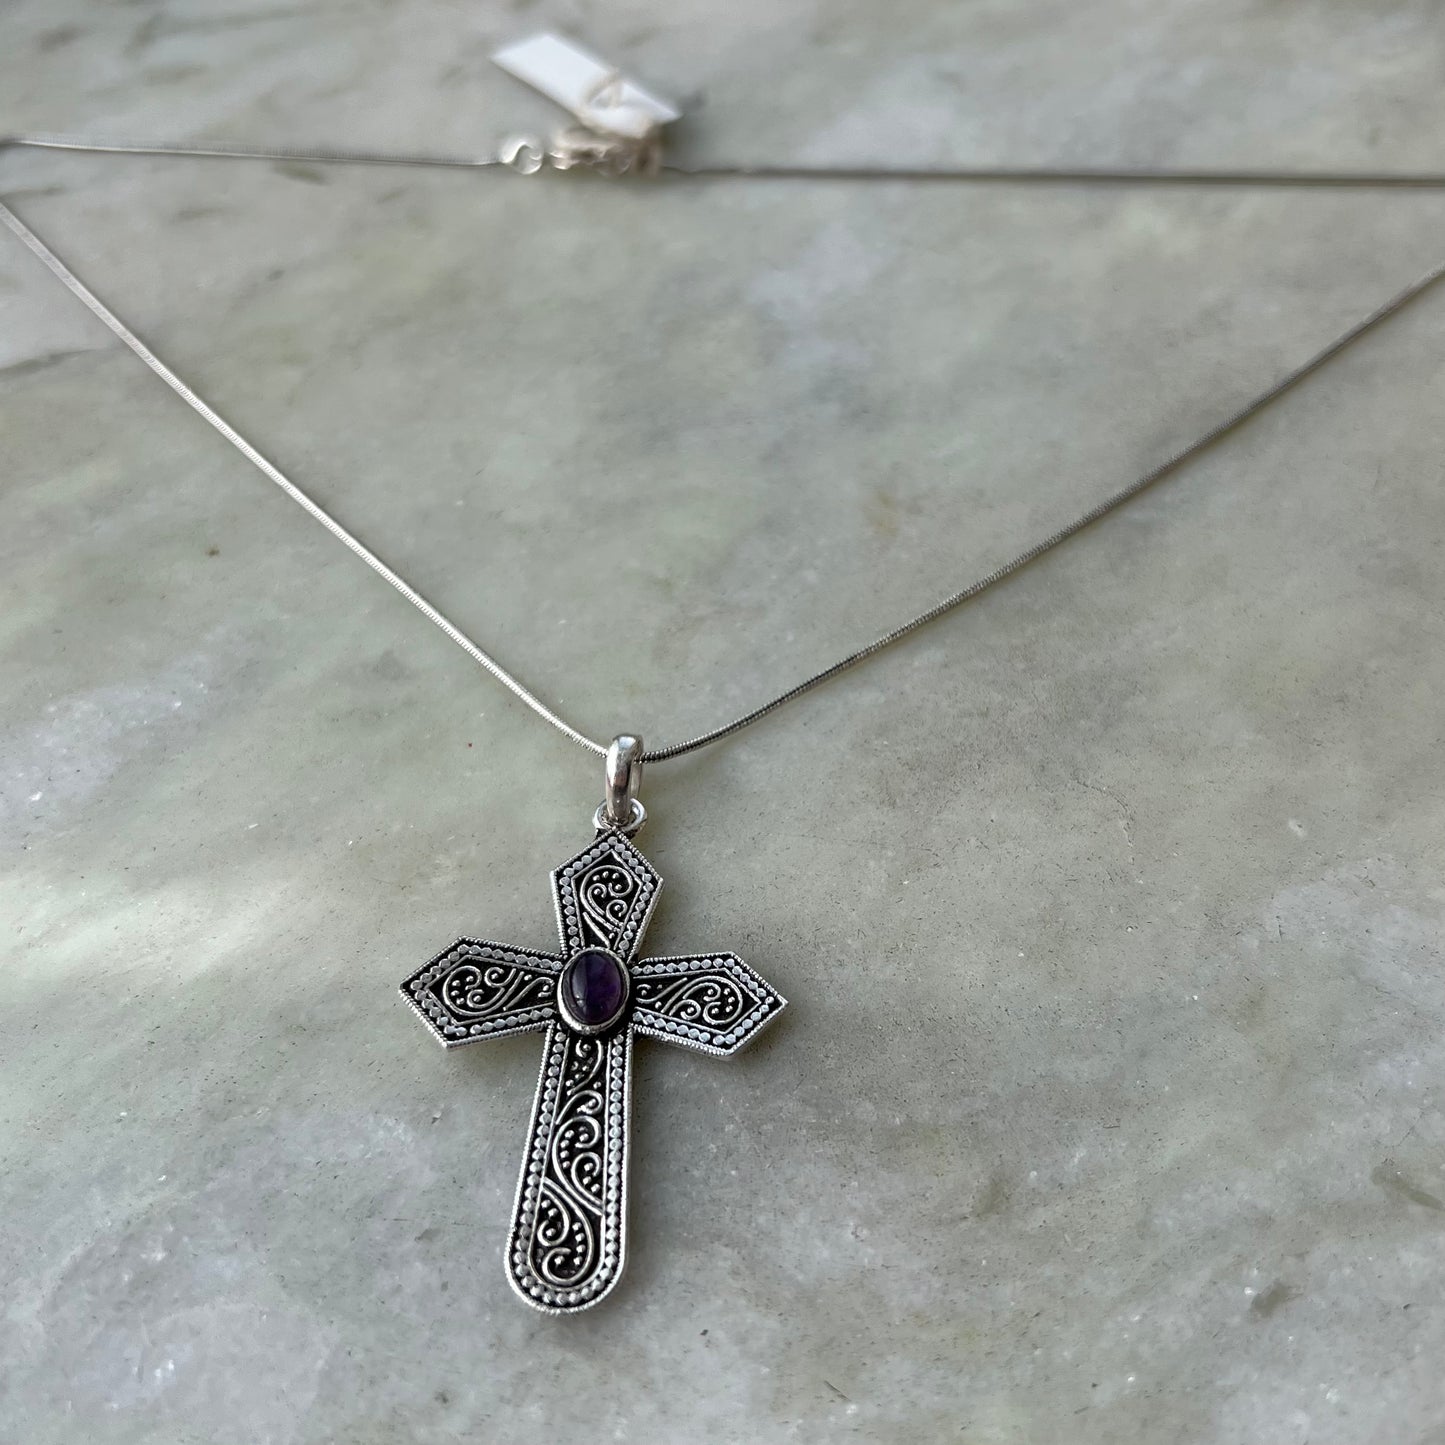 Wicca Cult Leader Cross Pendant Chain